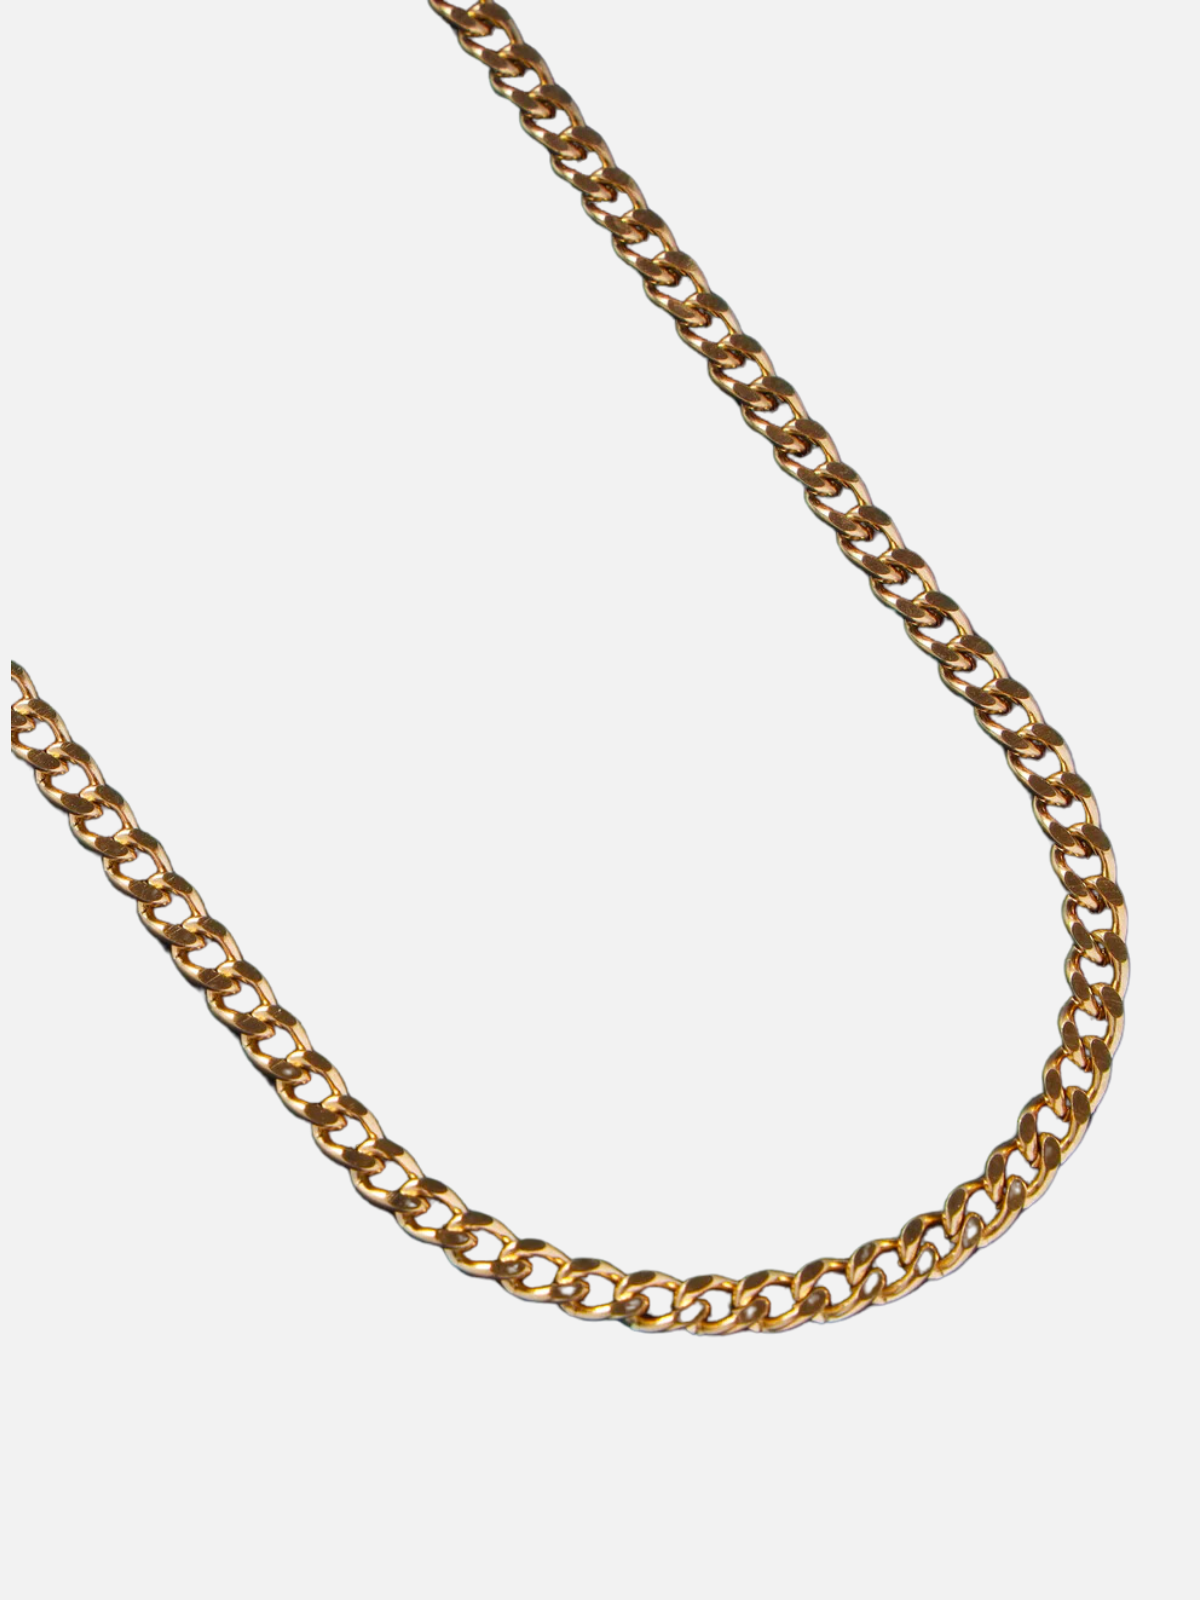 3.5 mm Gold Cuban Chain Necklace